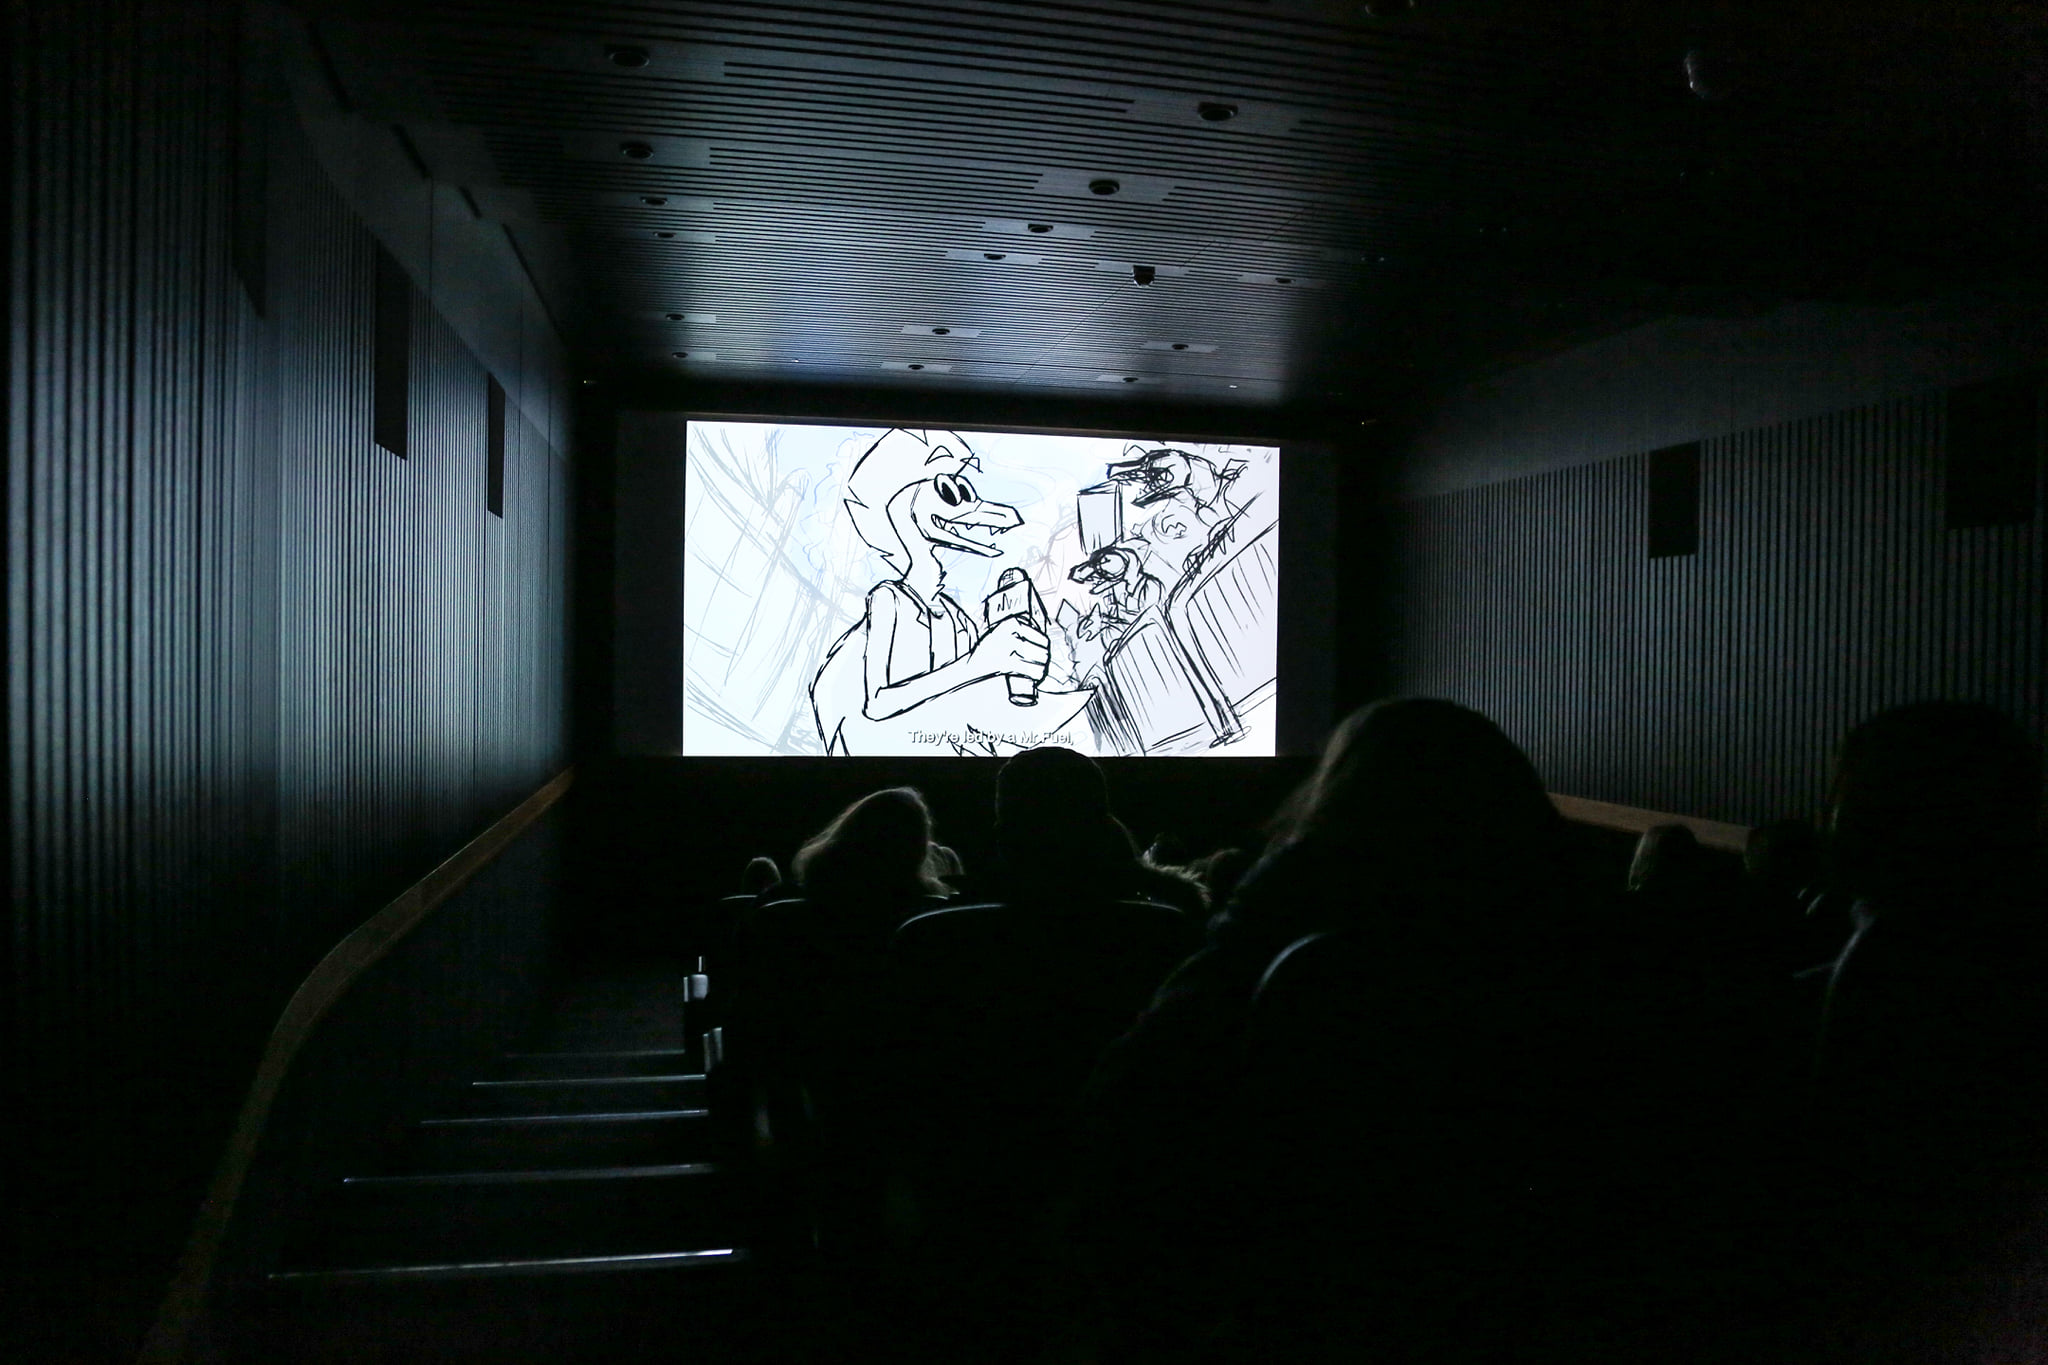 A dark cinema room with a lit screen with an animated film. The outlines of some heads in the audience can be seen, lit by the screen.